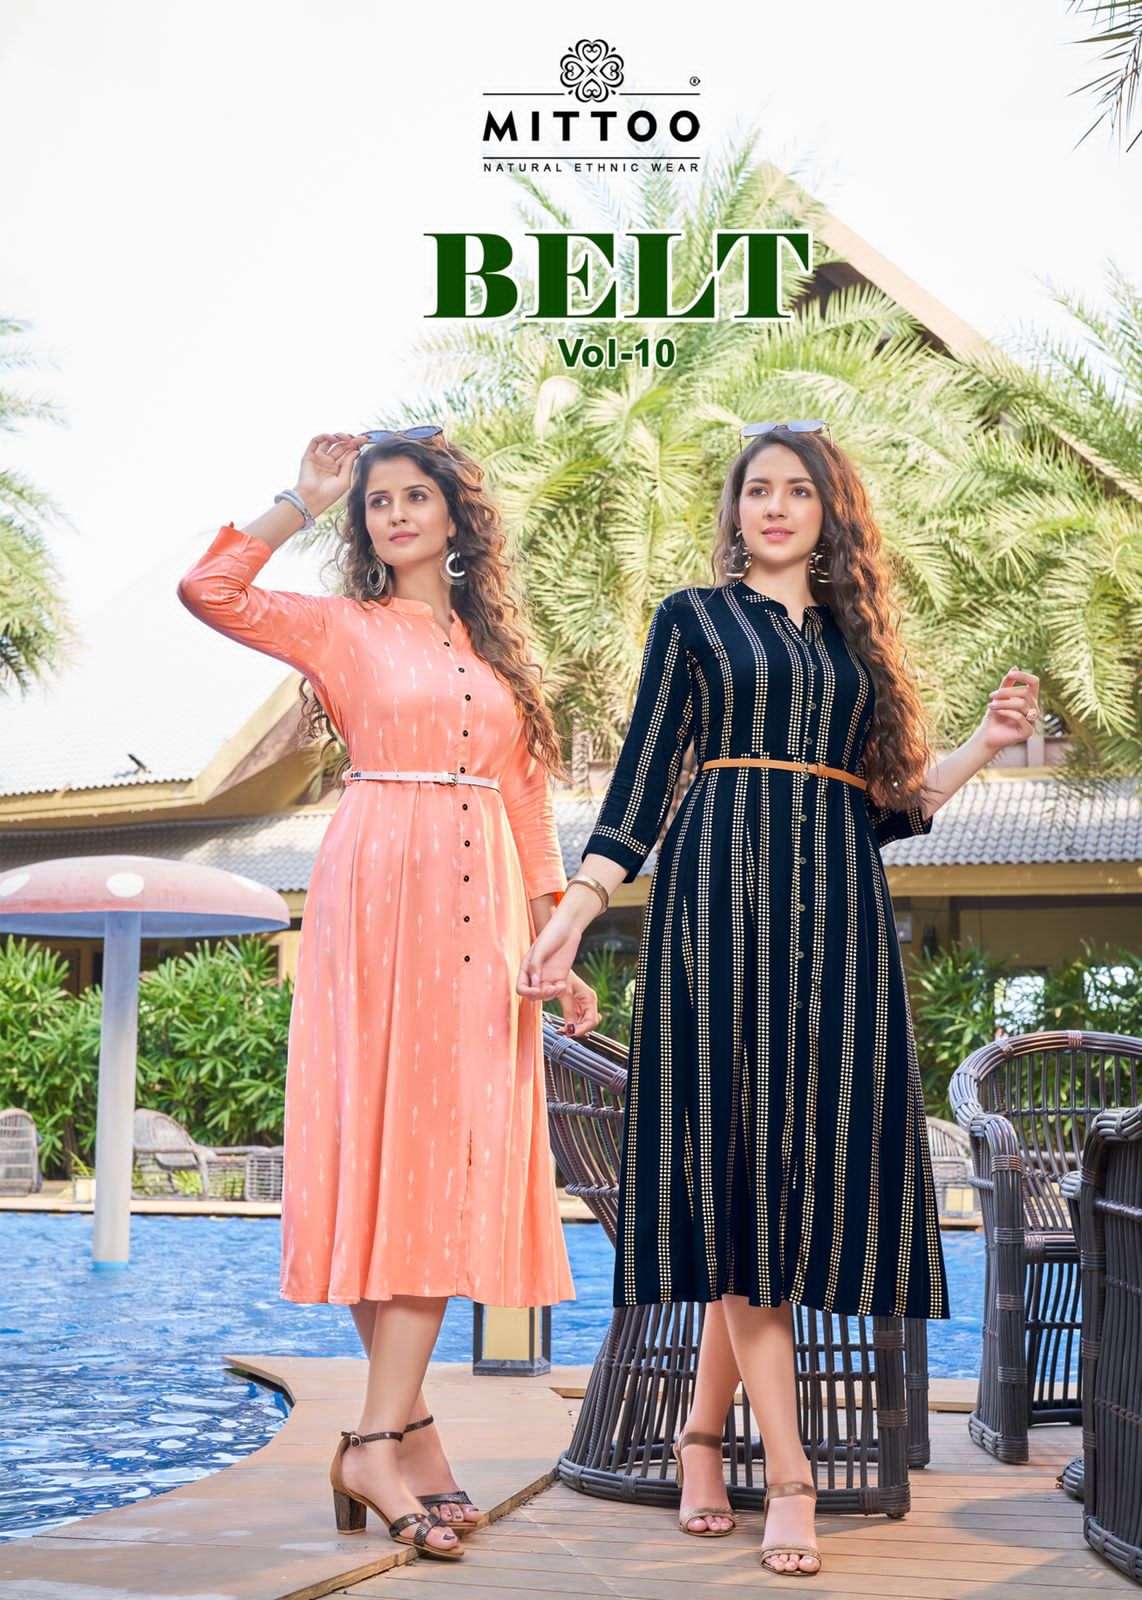 mitto belt vol 10 series 1118 to 1123 one piece dress gown with belt for girlish wear look gown with belt 